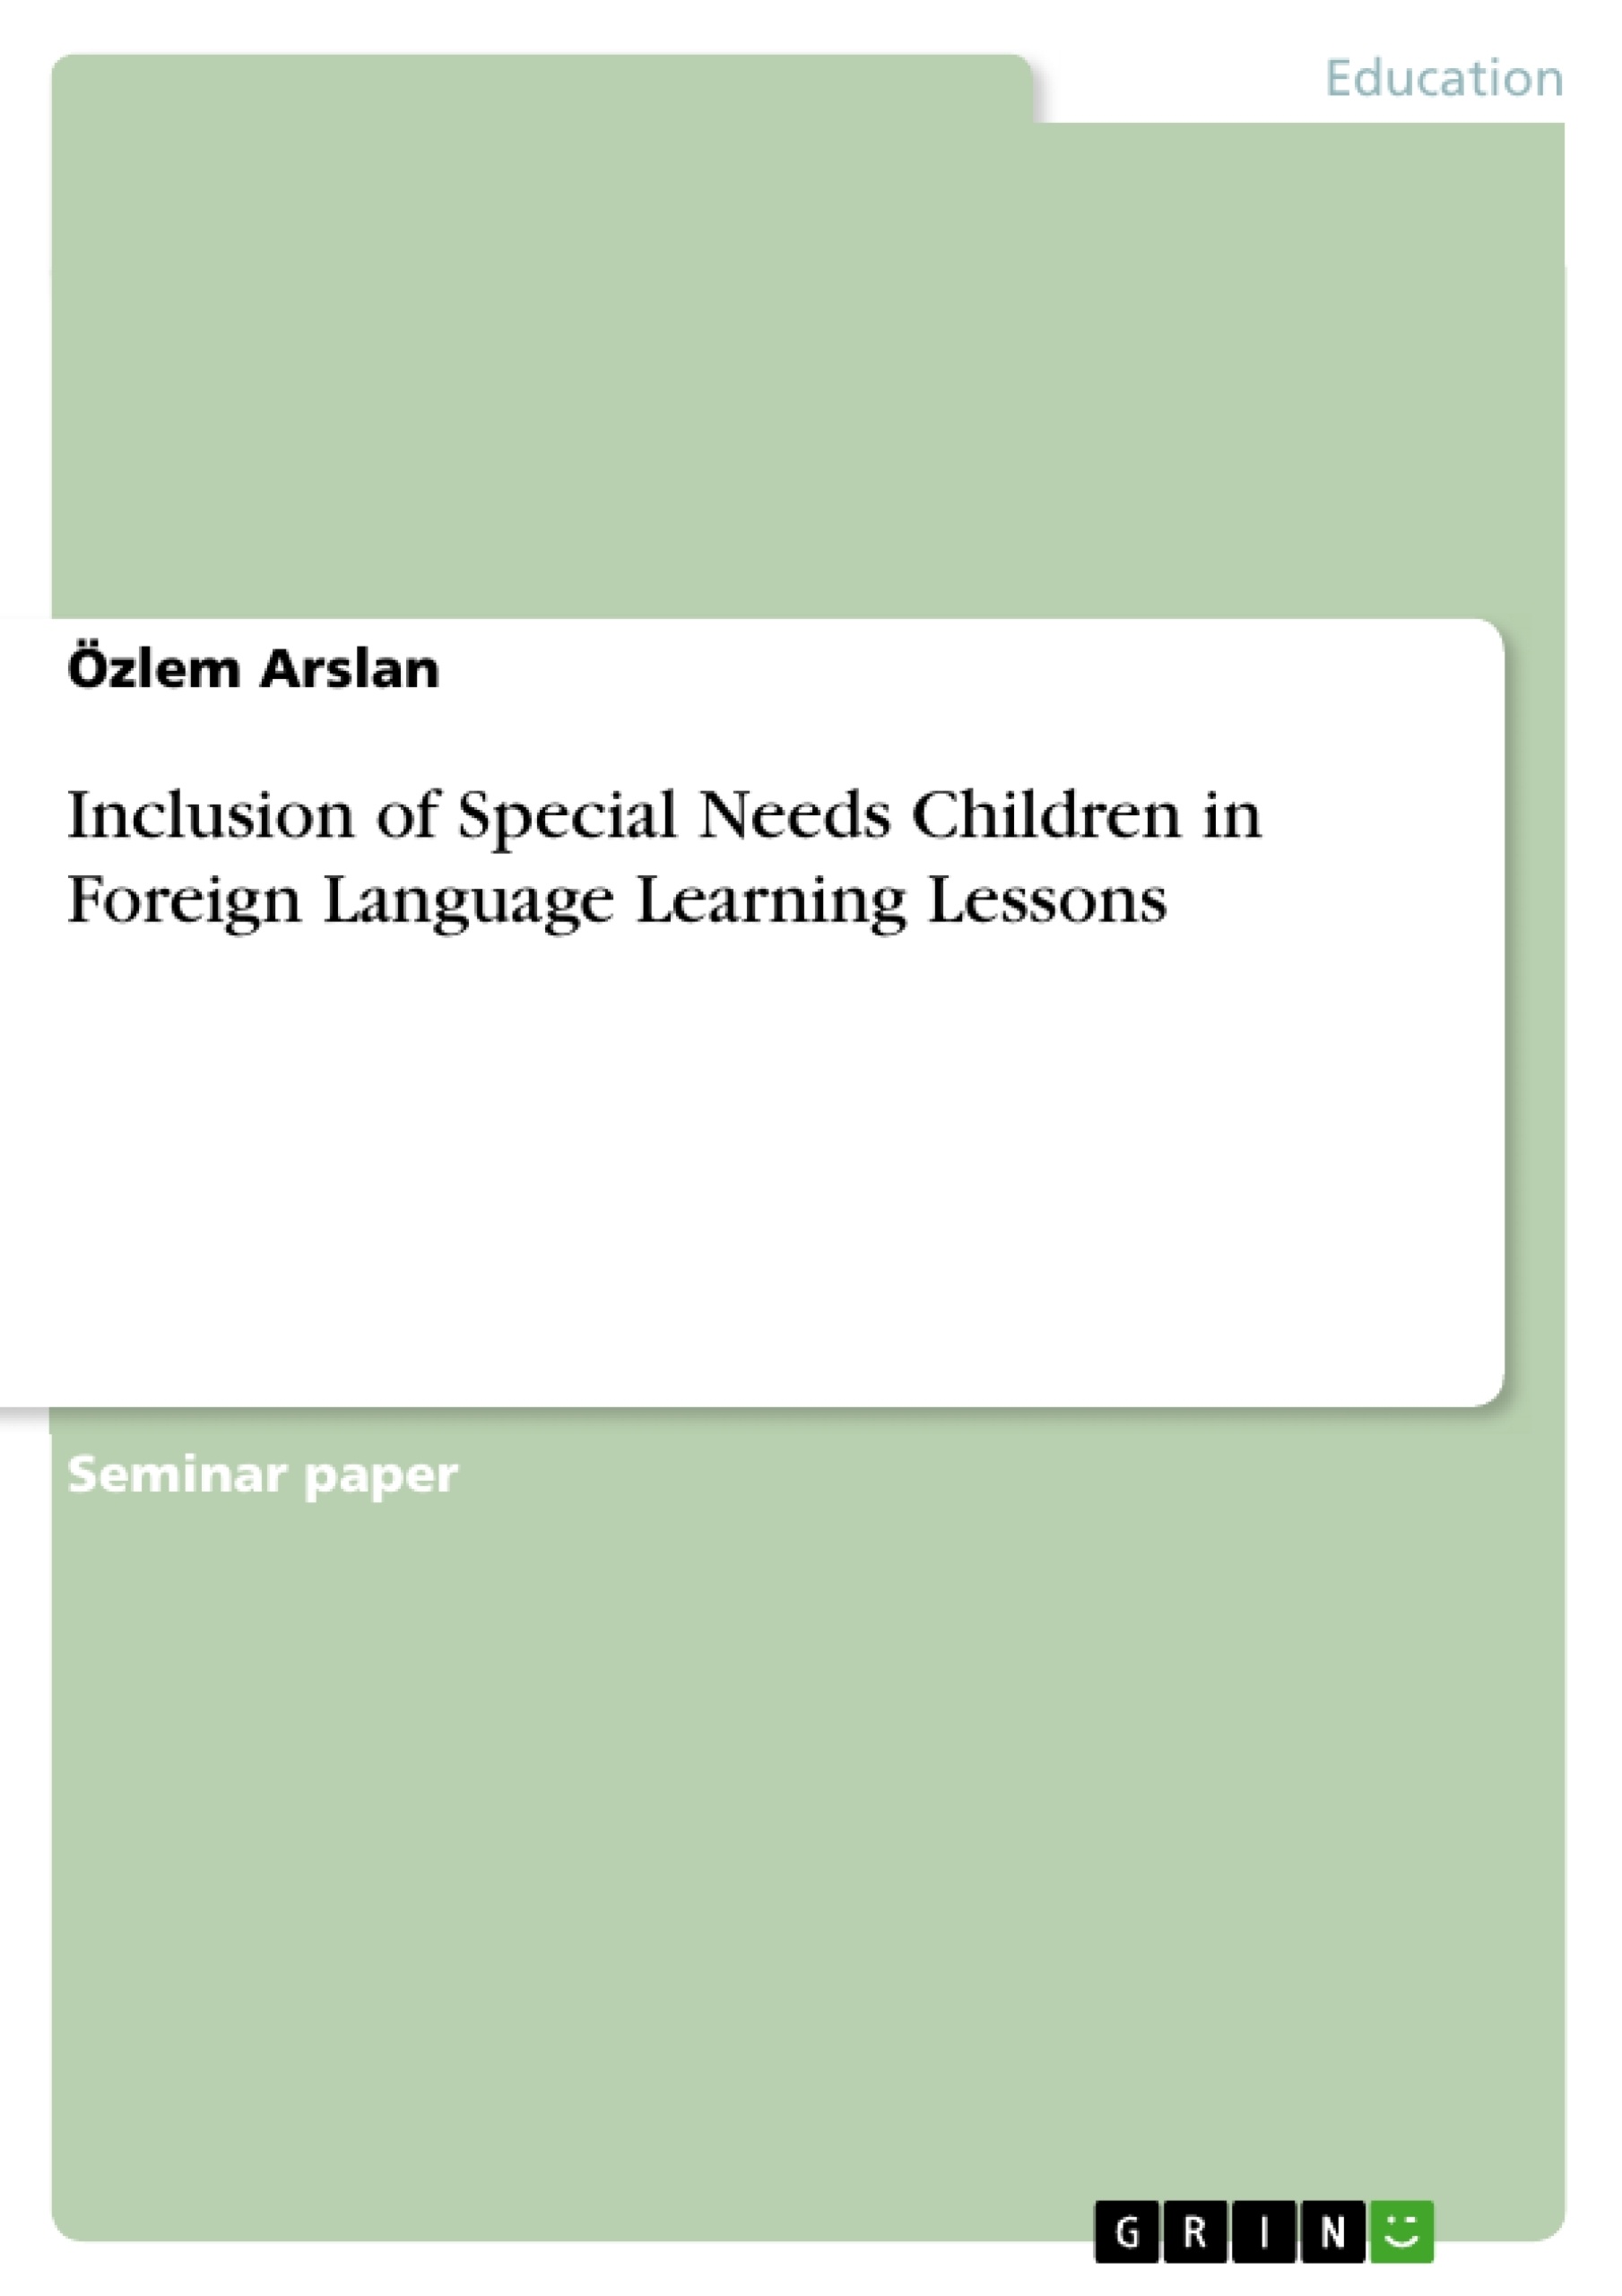 Title: Inclusion of Special Needs Children in Foreign Language Learning Lessons